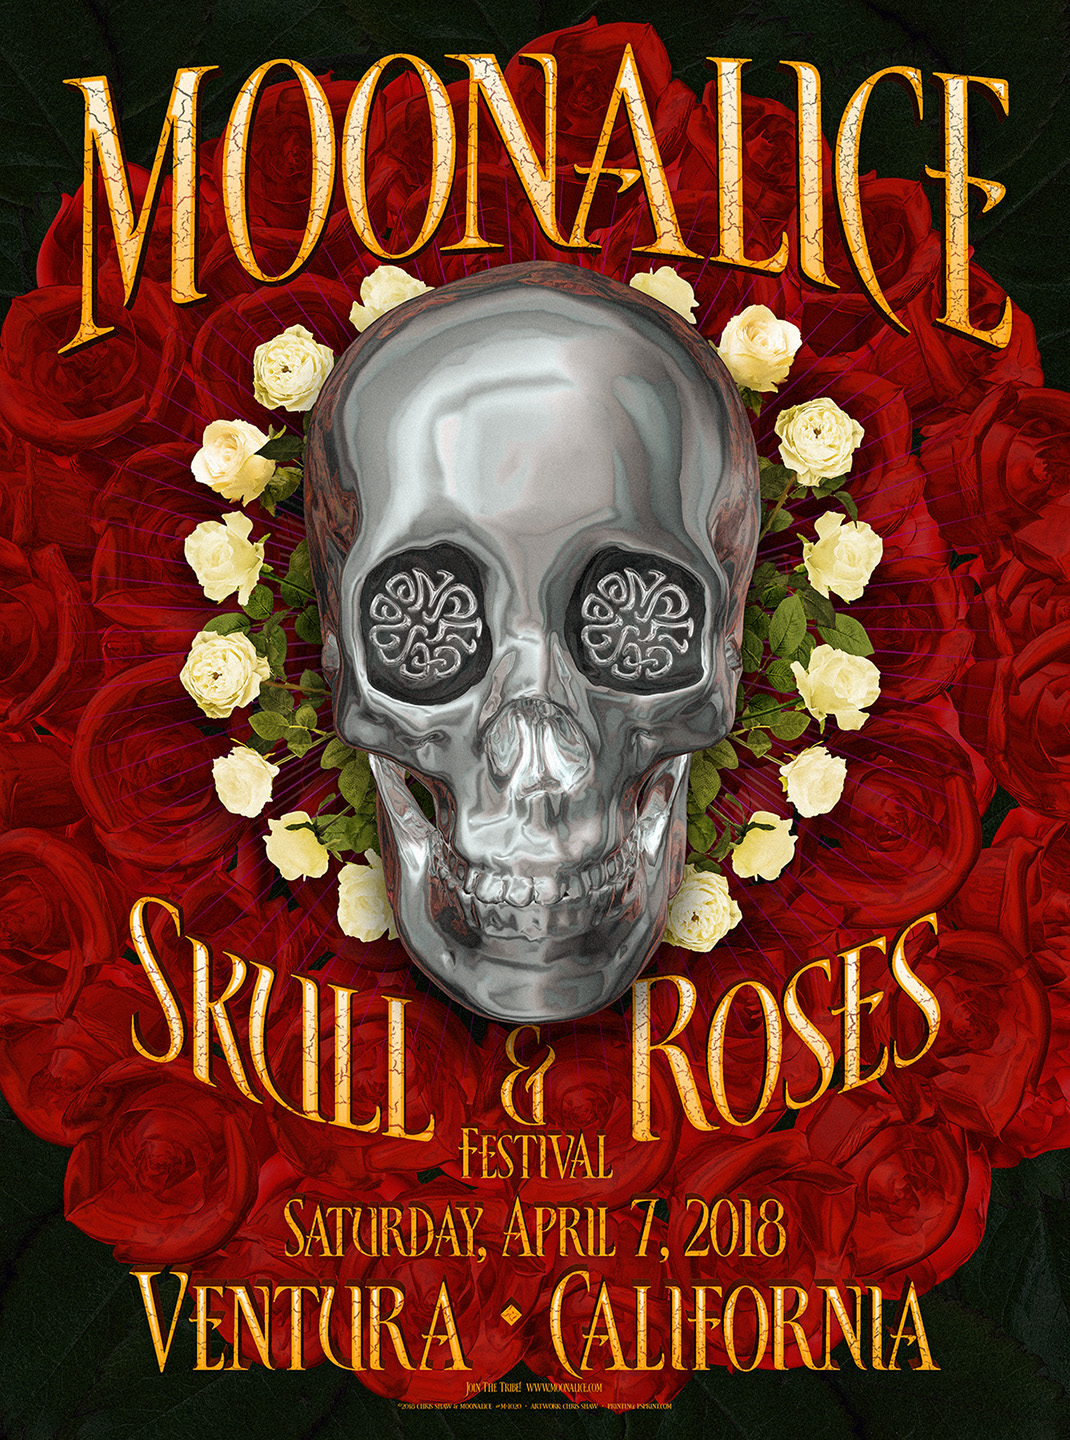 Moonalice 20180407 Skull & Roses Festival Moonalice Free Download